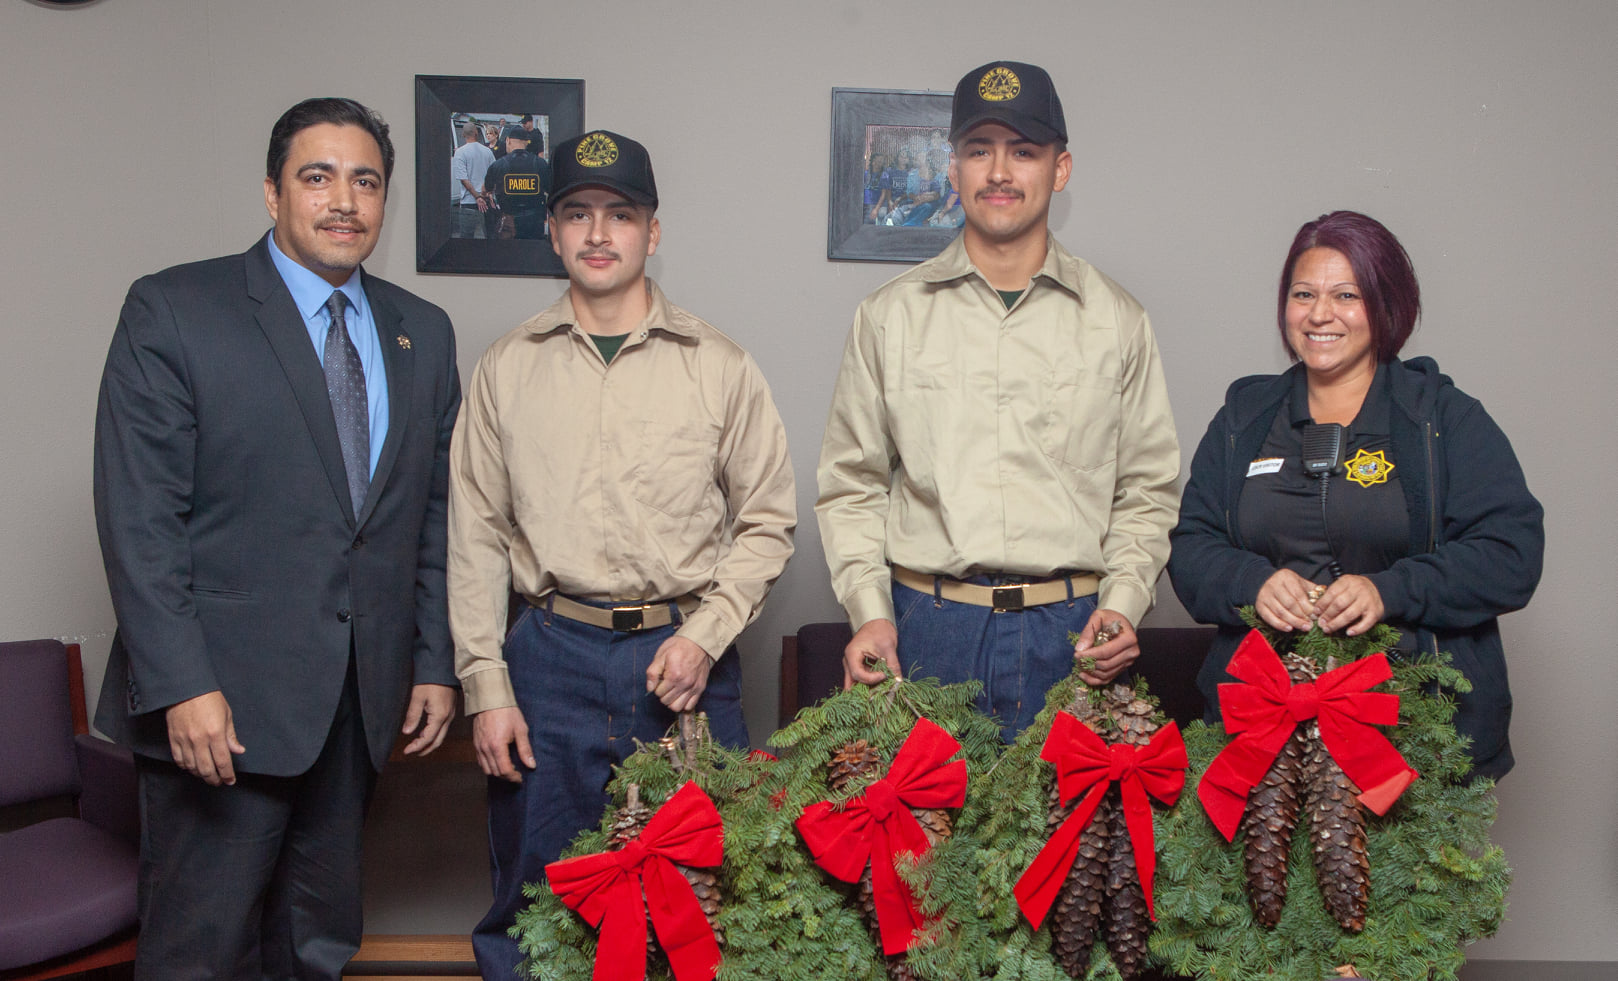 Two fire camp youth hold wreaths while a parole agent and the CDCR executive stand on either side.